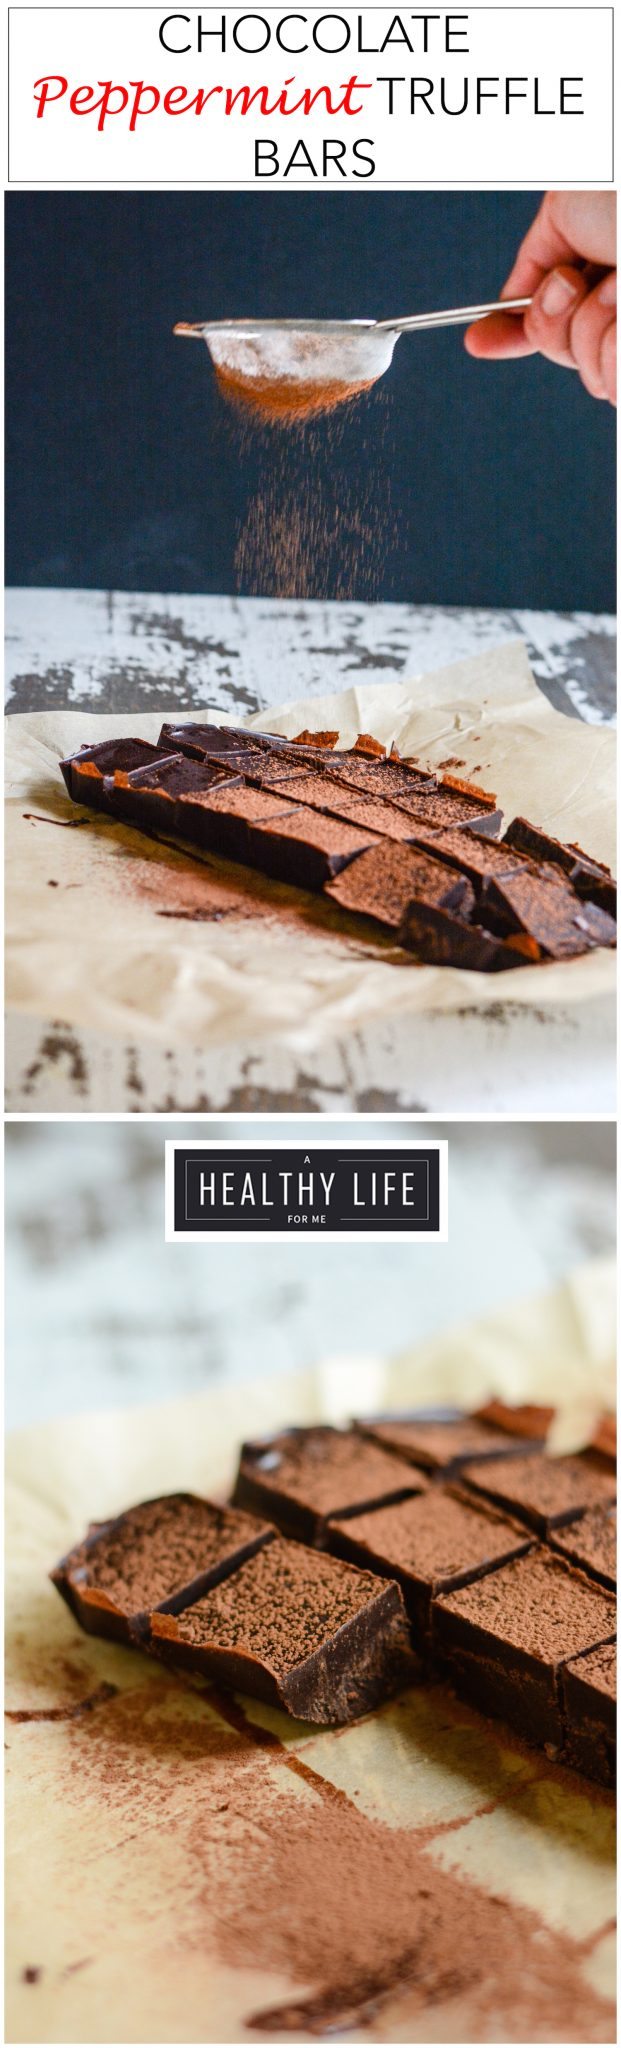 Chocolate Peppermint Truffle Bars are the perfect no bake gluten free easy to make holiday treat and a great way to celebrate the holidays | ahealthylifeforme.com